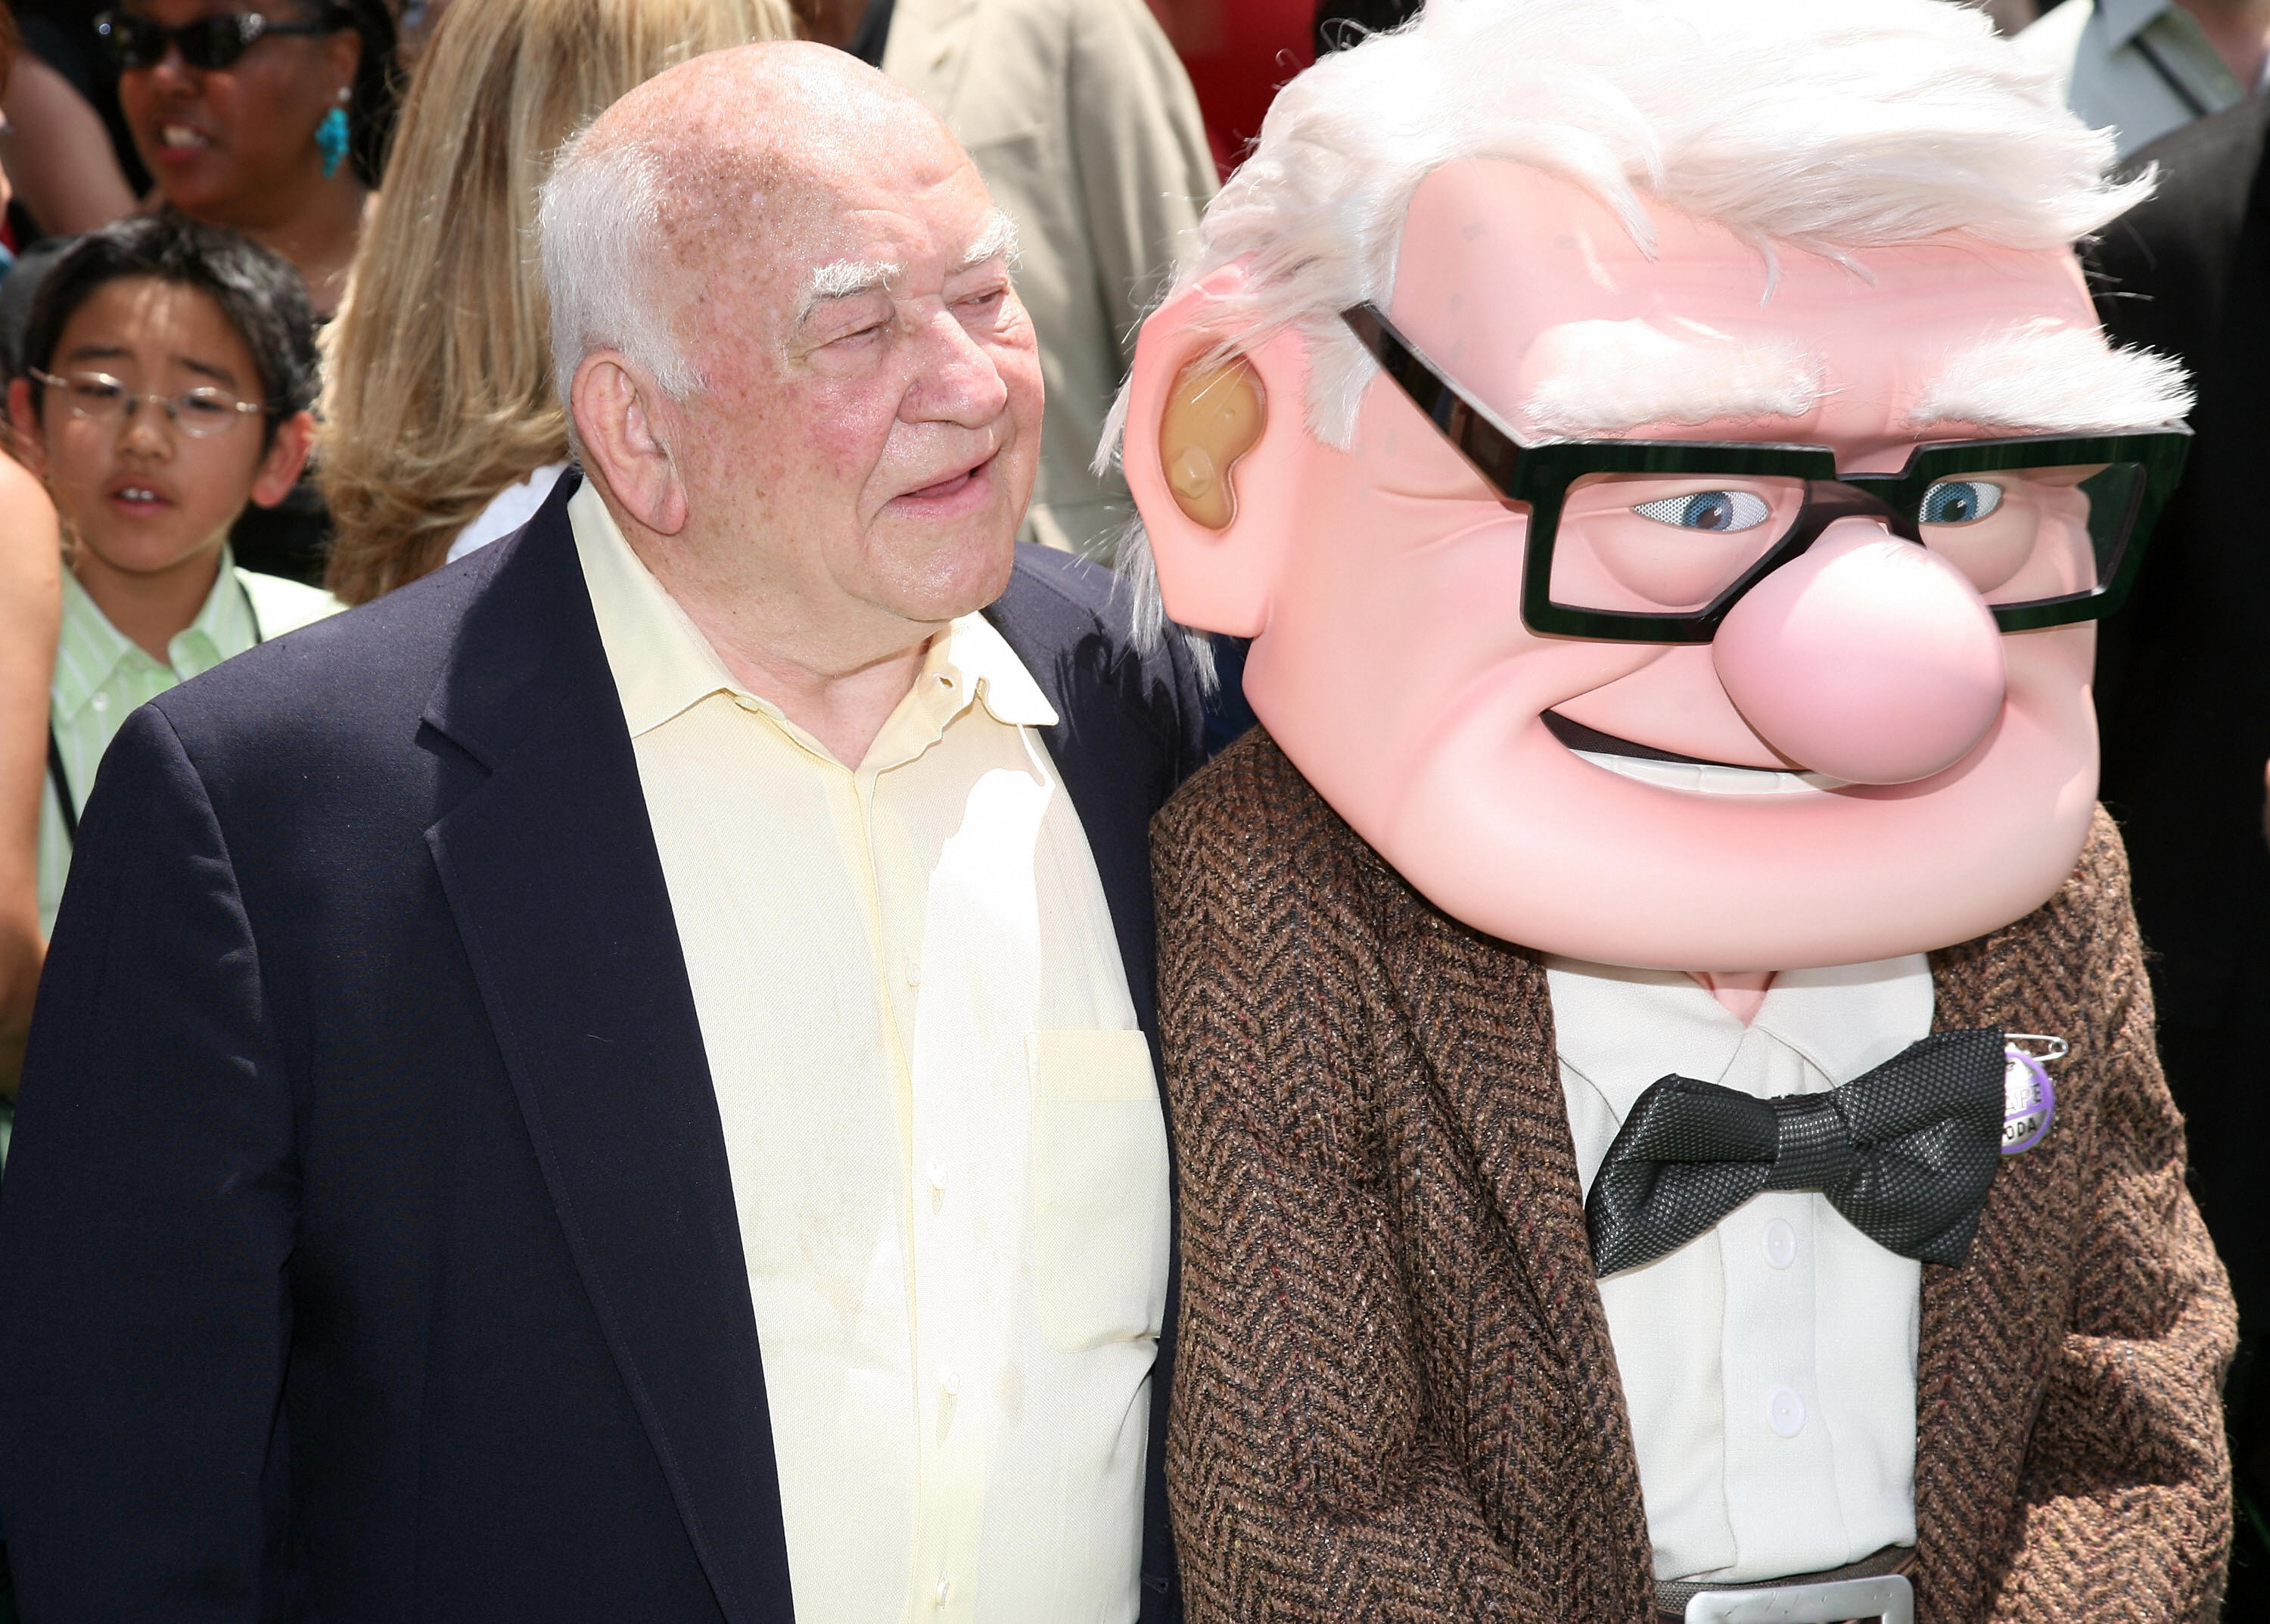 Ed Asner puts his arm around Carl from Up